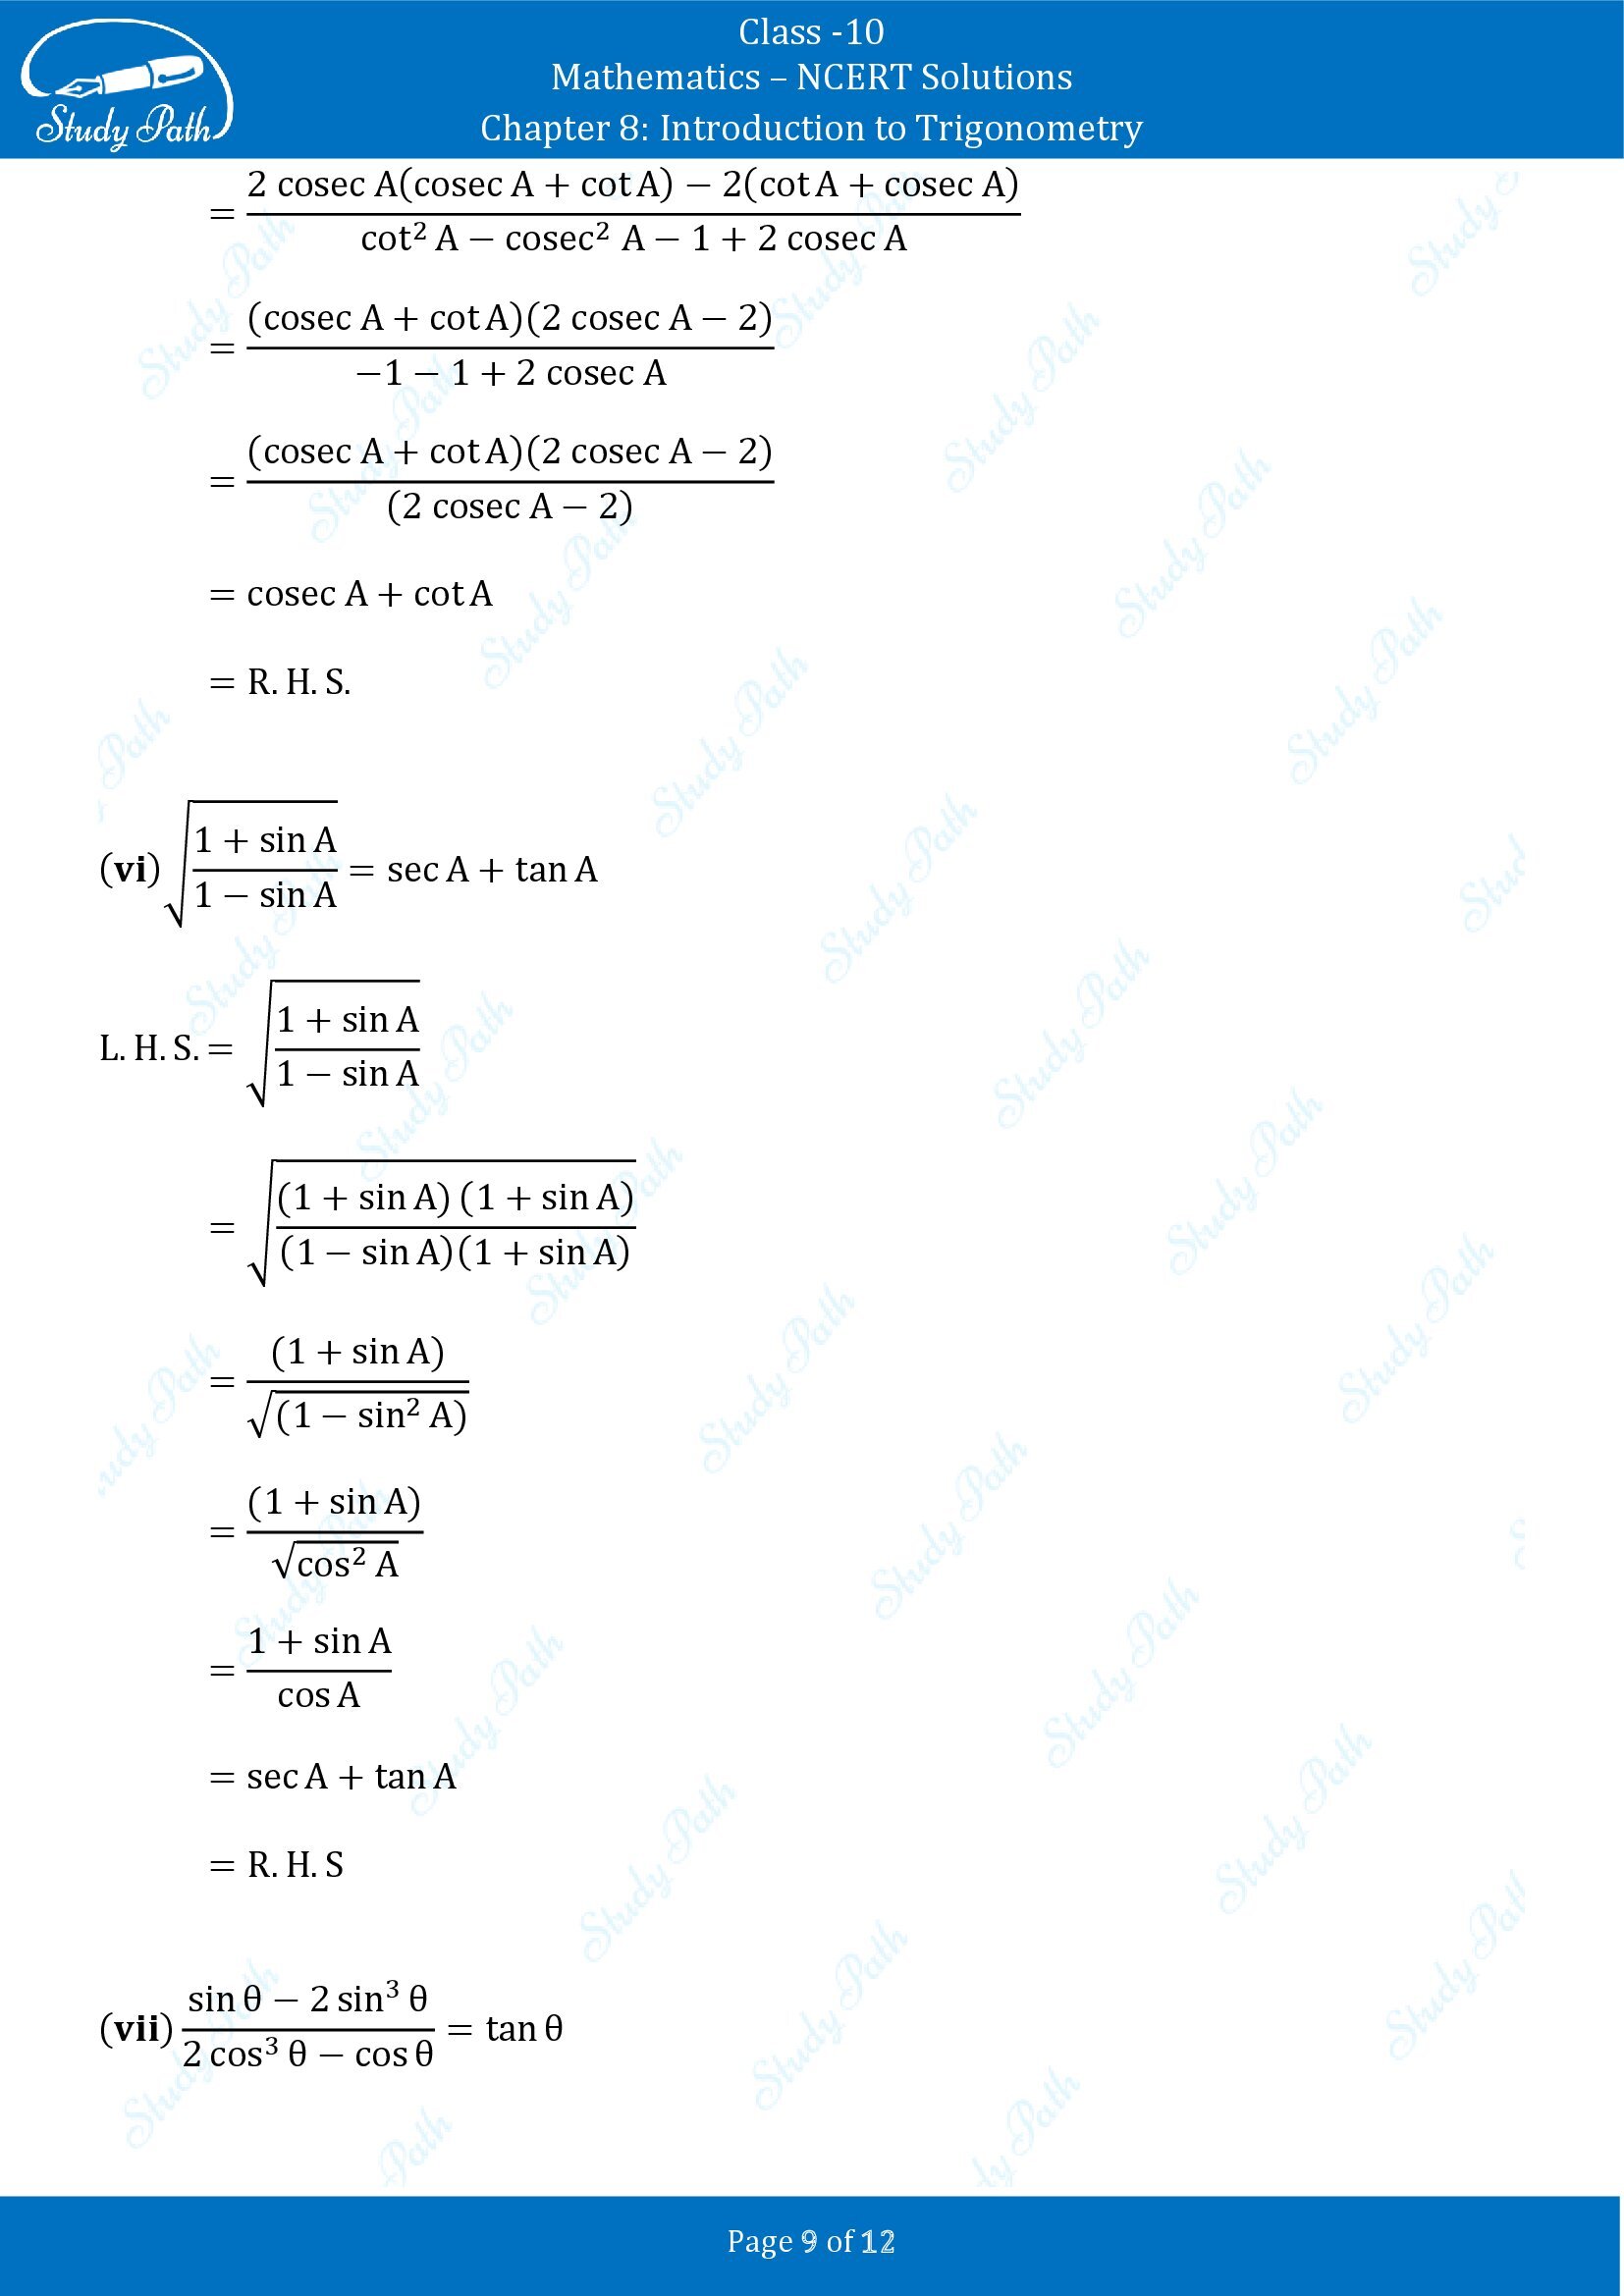 NCERT Solutions for Class 10 Maths Chapter 8 Introduction to Trigonometry Exercise 8.4 00009